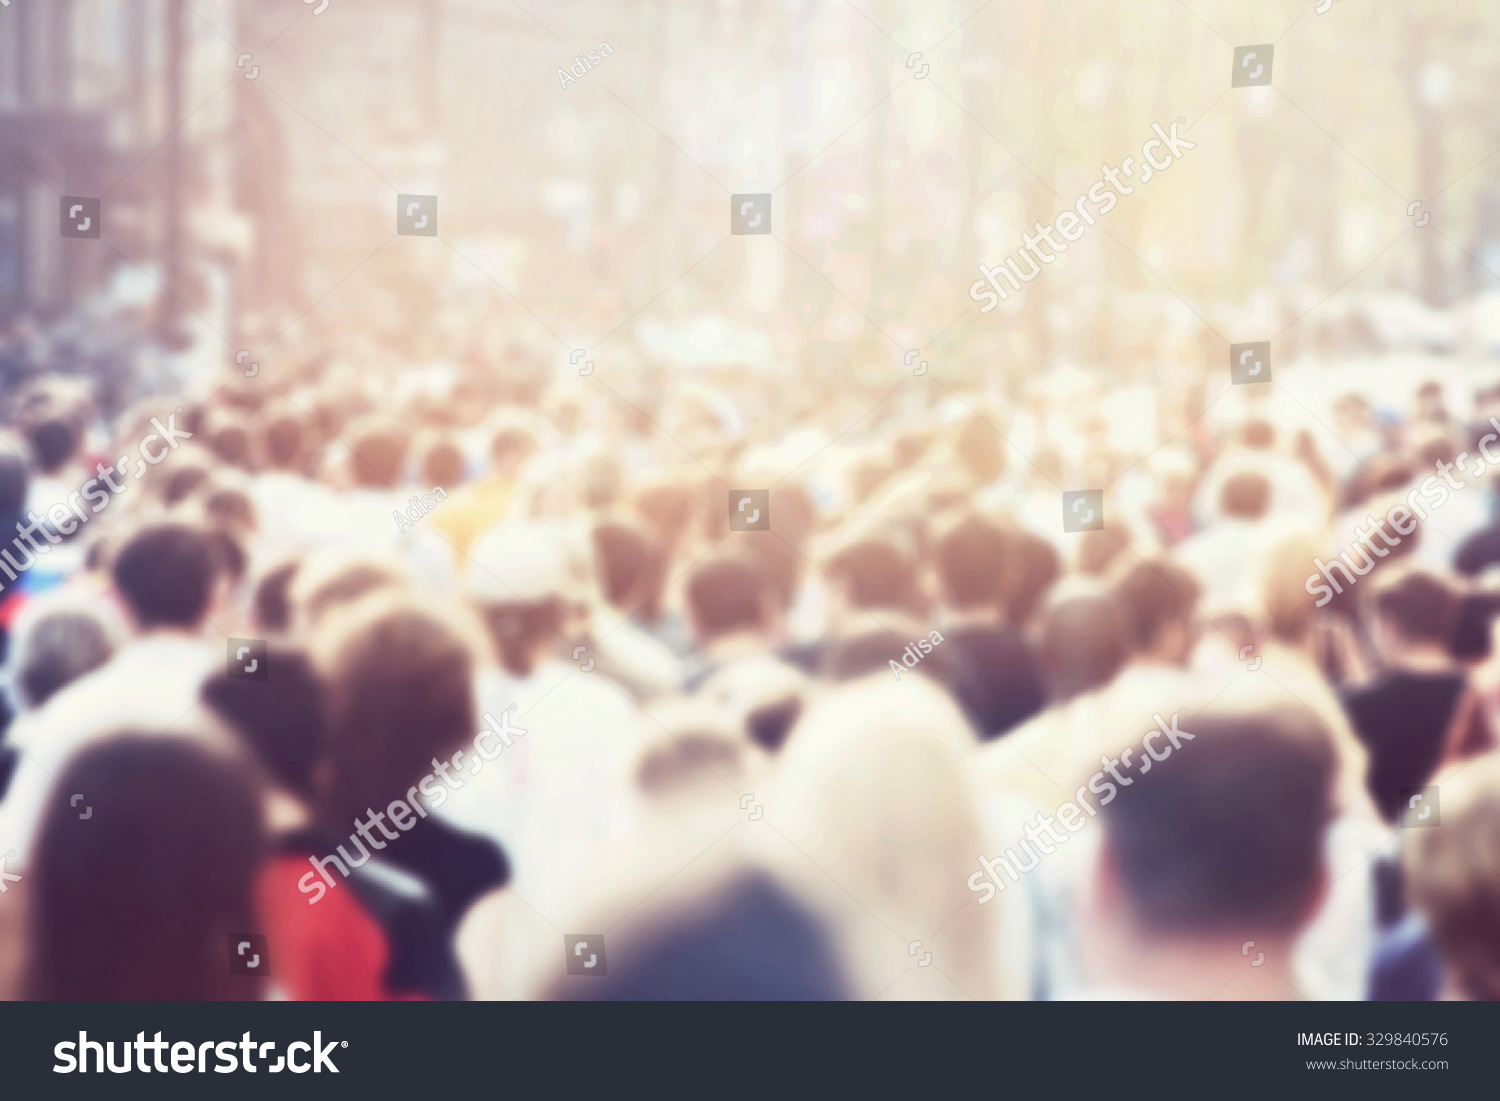 Crowd of people #329840576